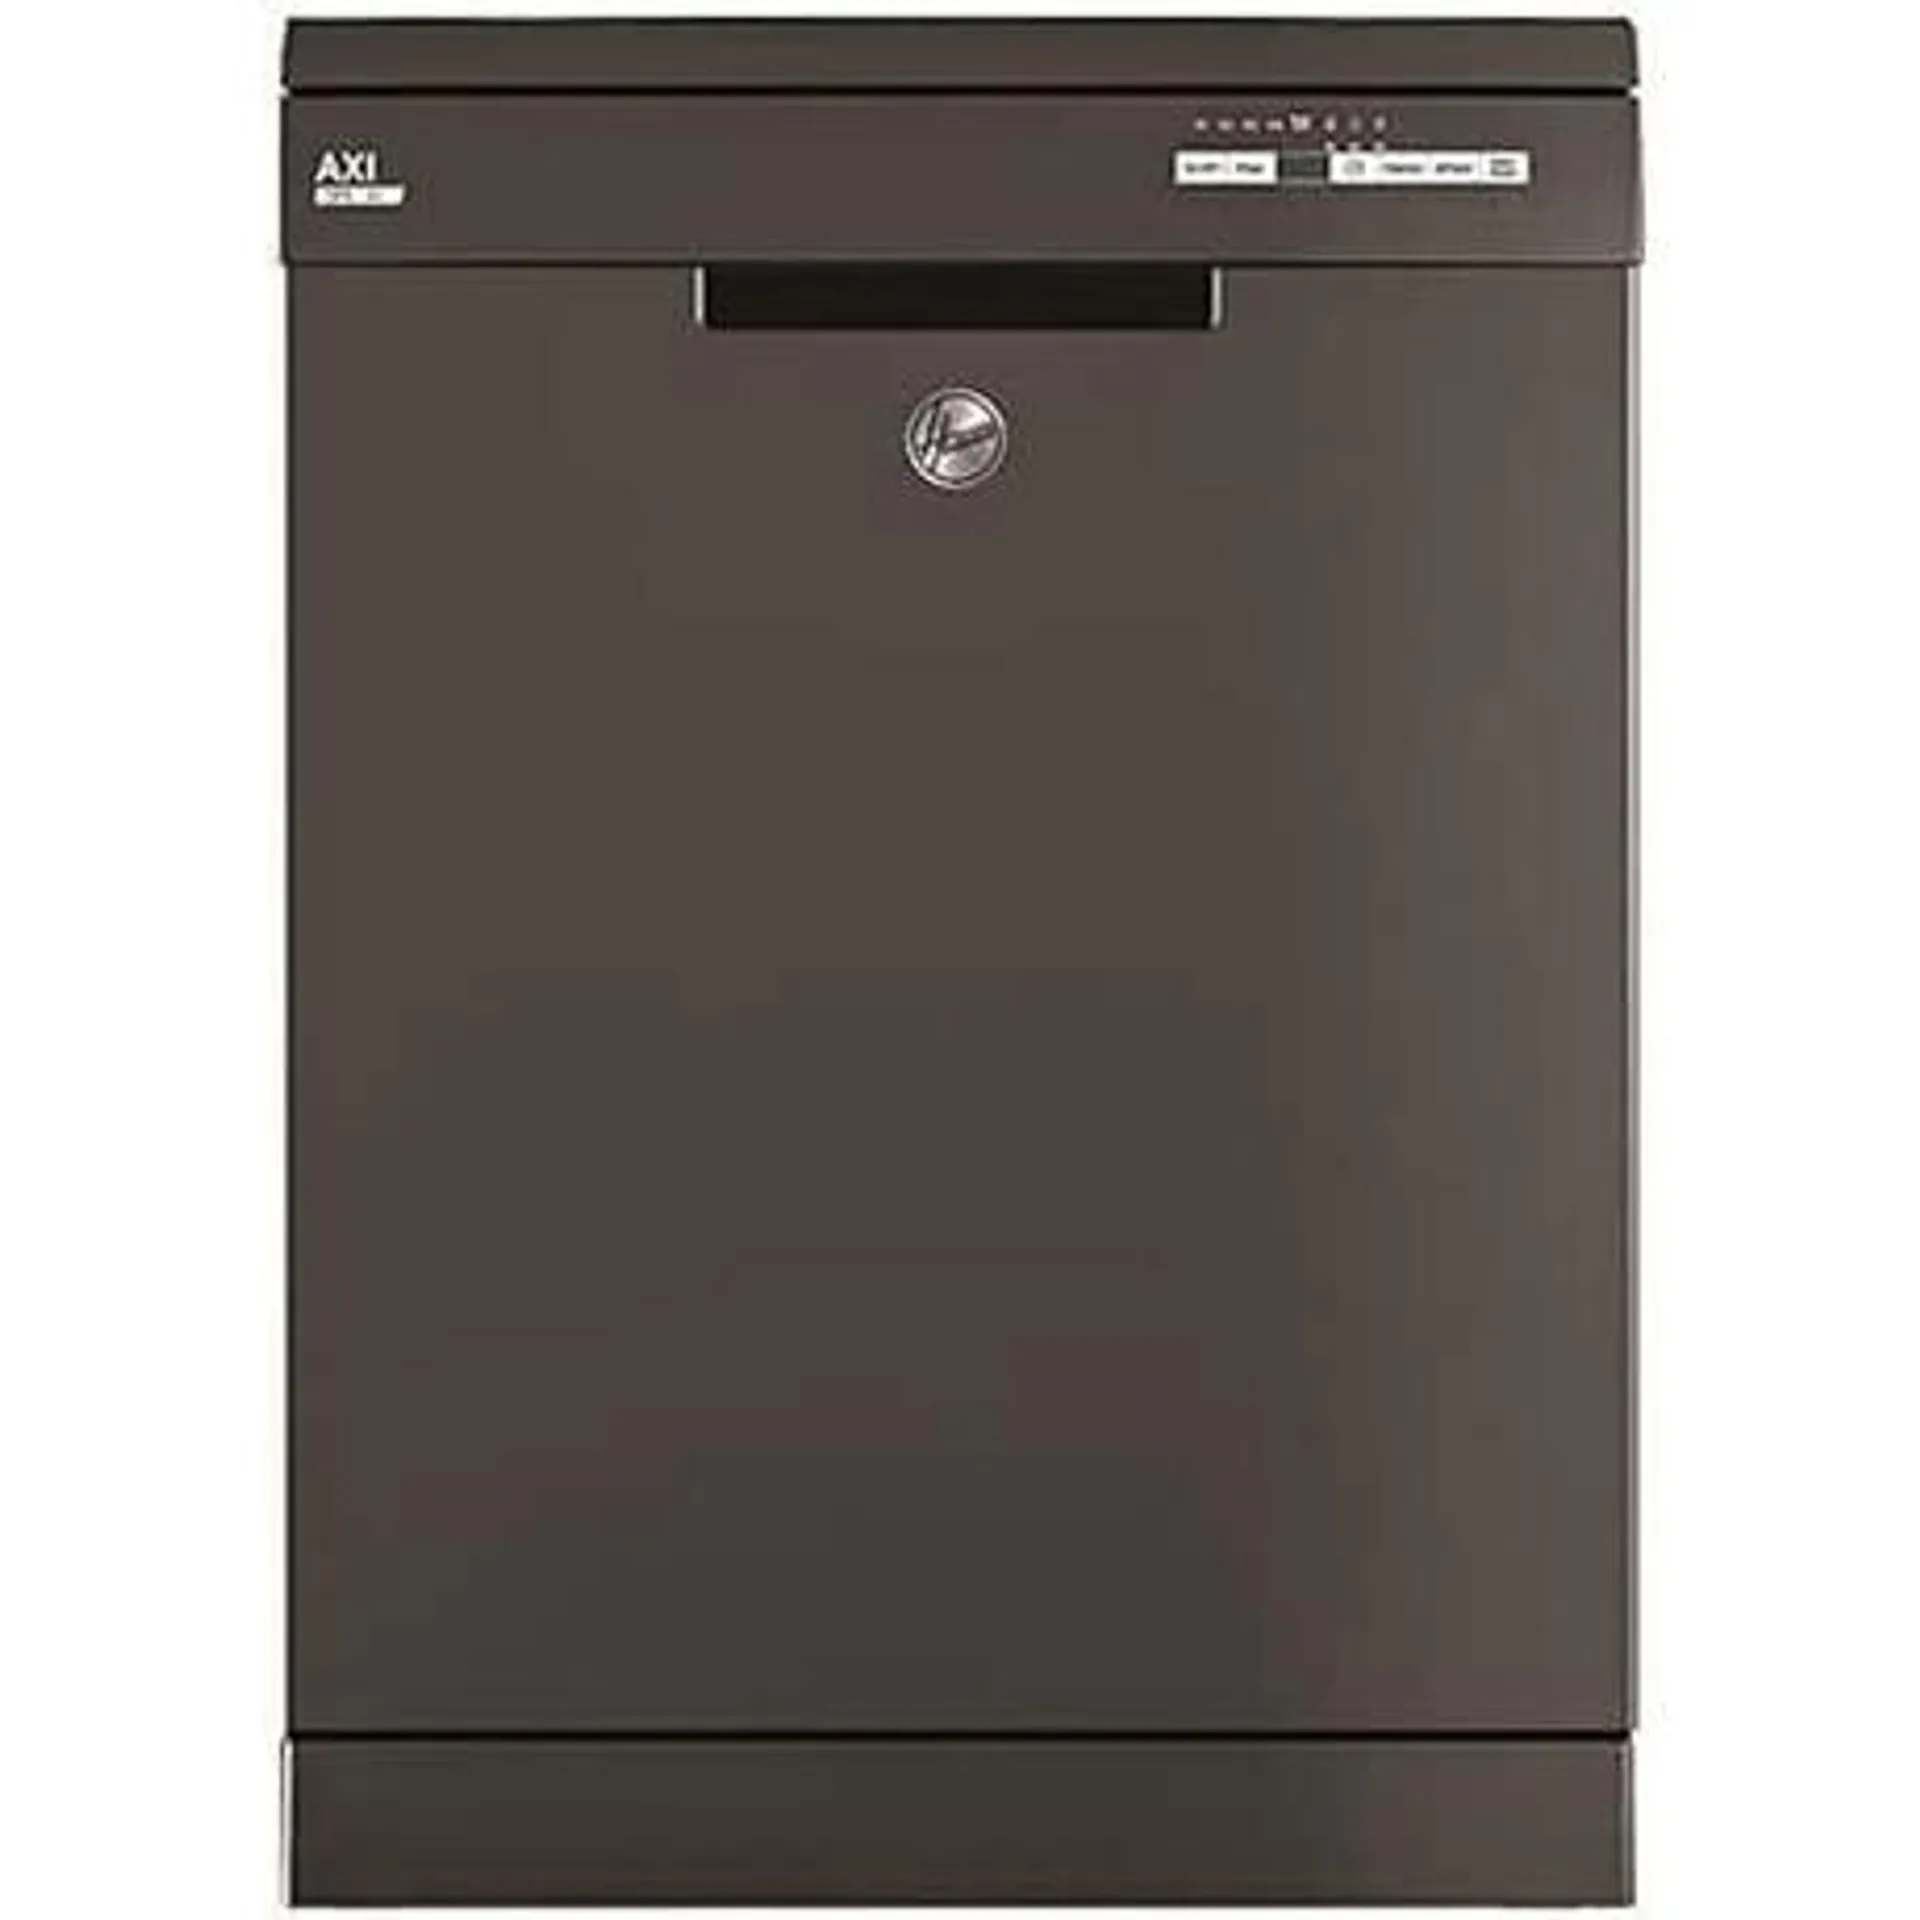 Hoover HSPN1L390PA-80 Dishwasher - Graphite - 13 Place Settings